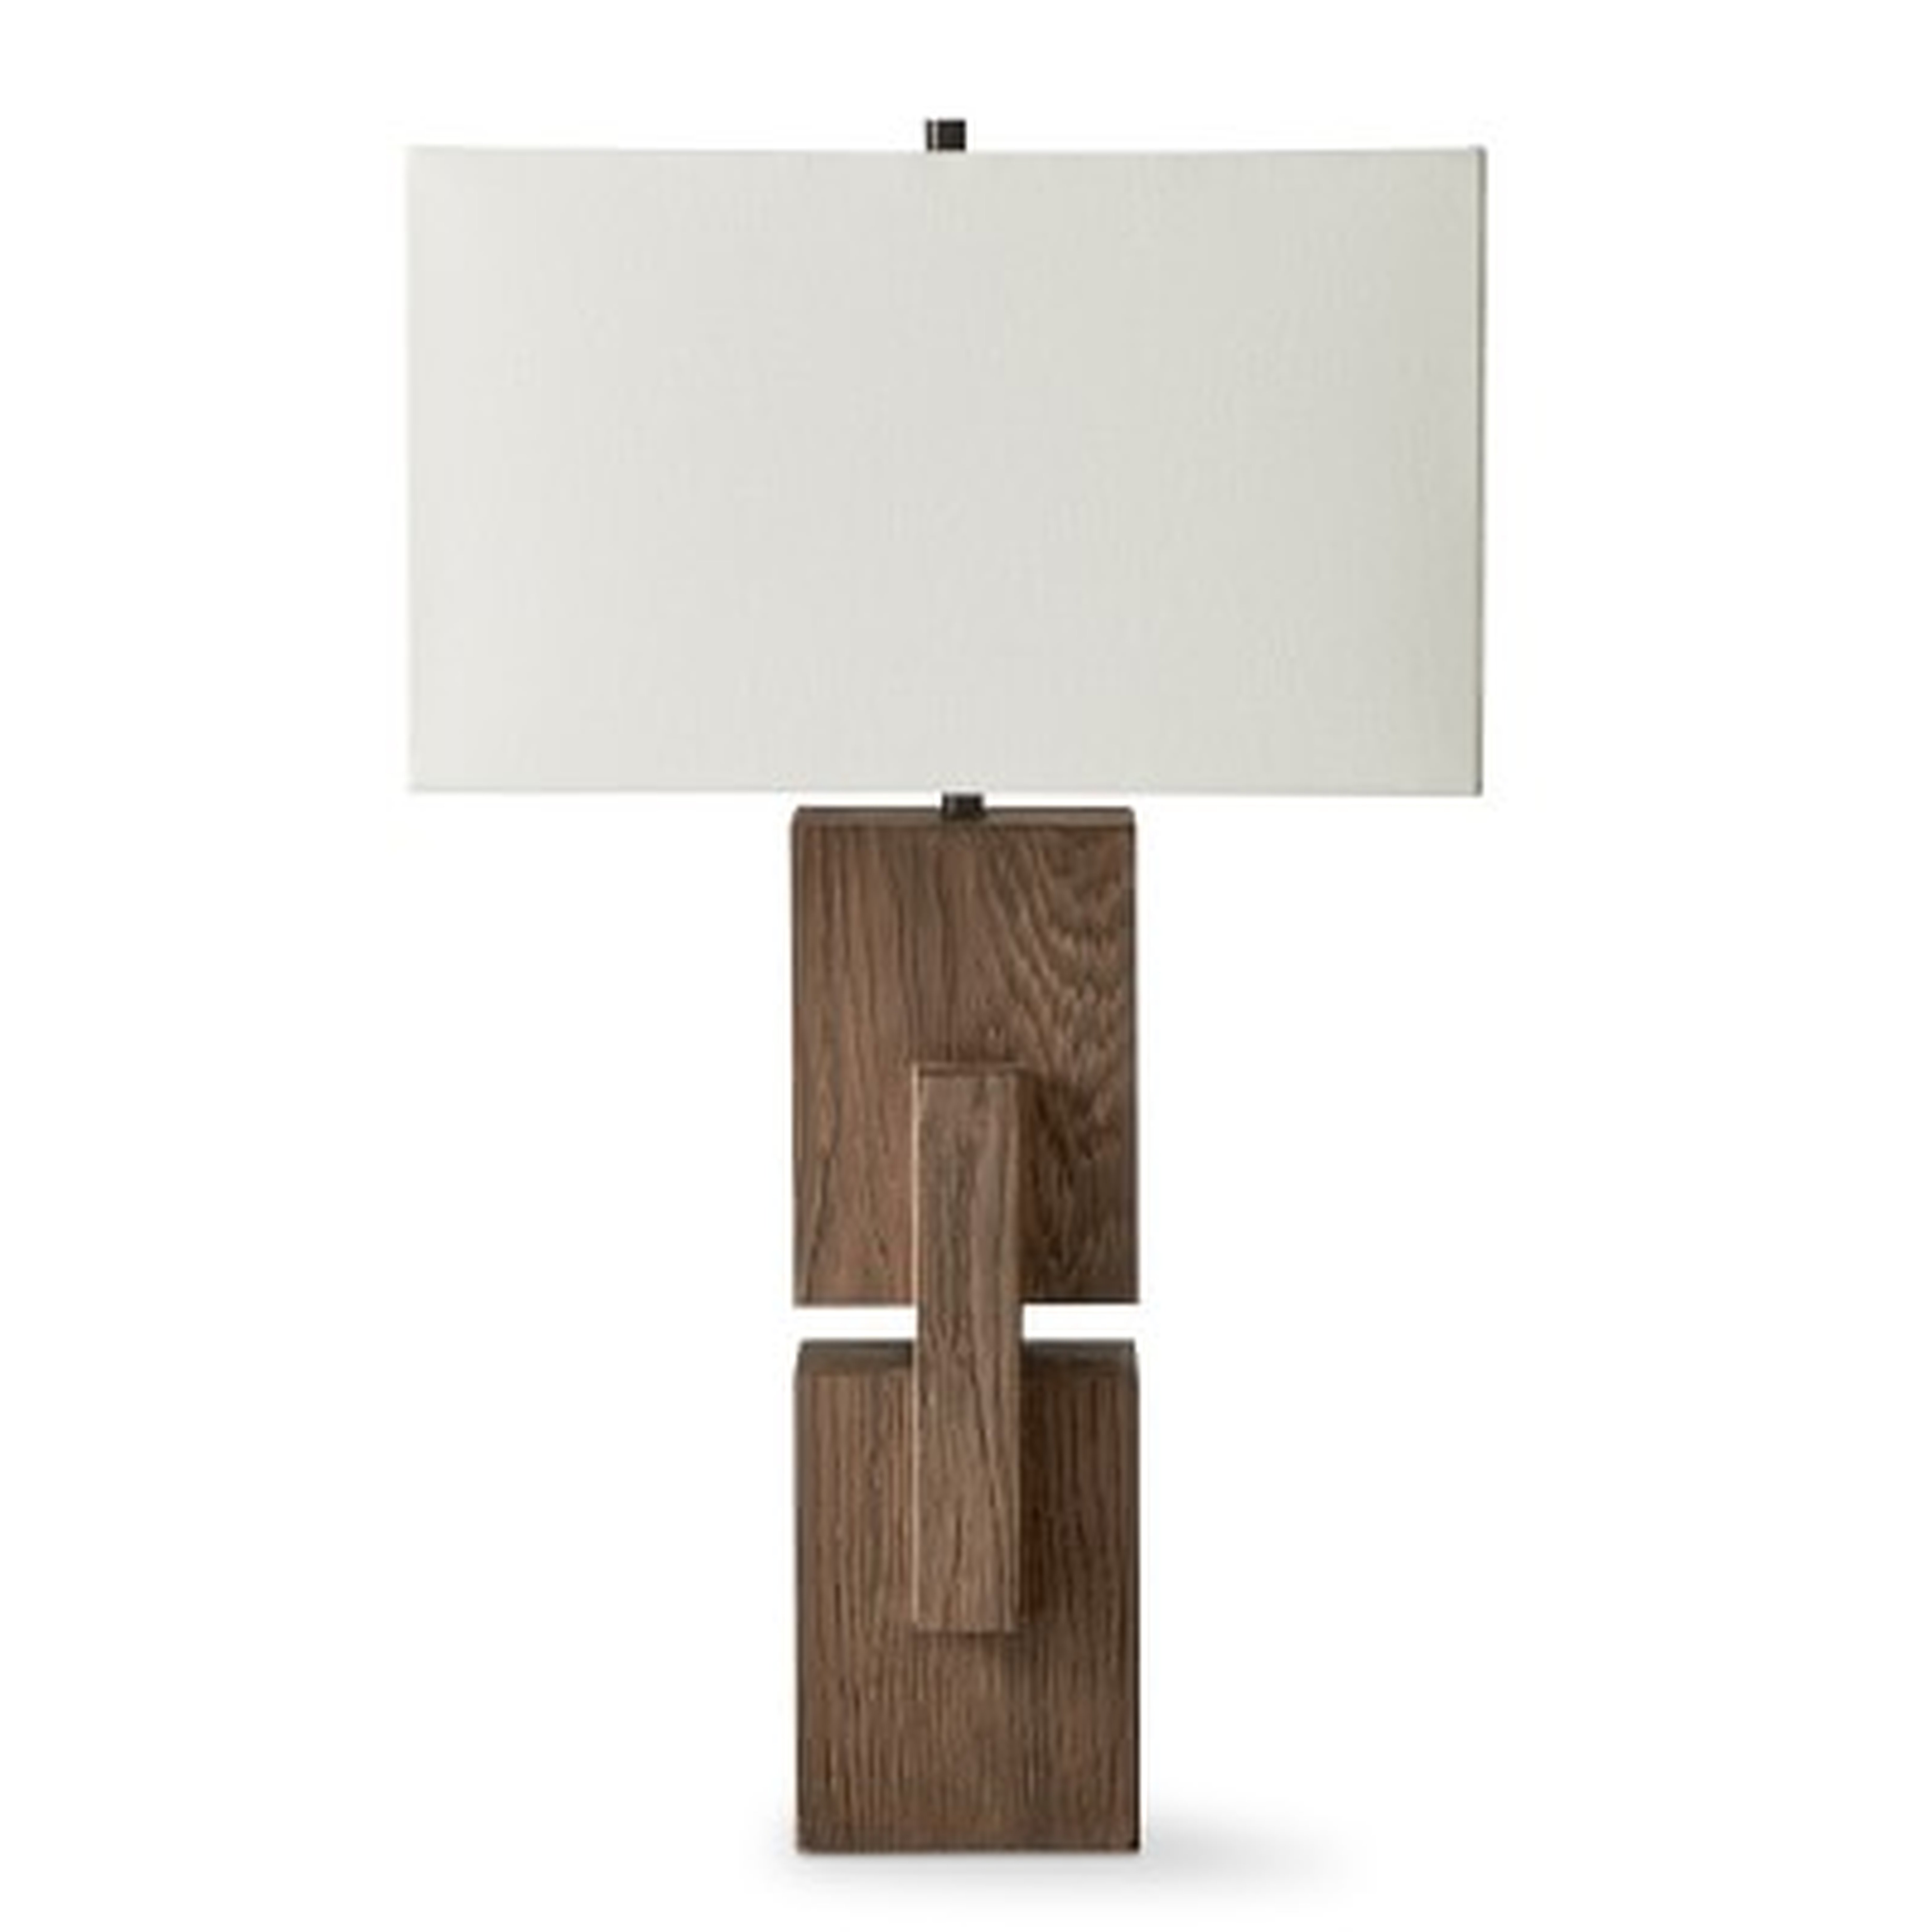 Joinery Rectangular Wood Table Lamp - Williams Sonoma